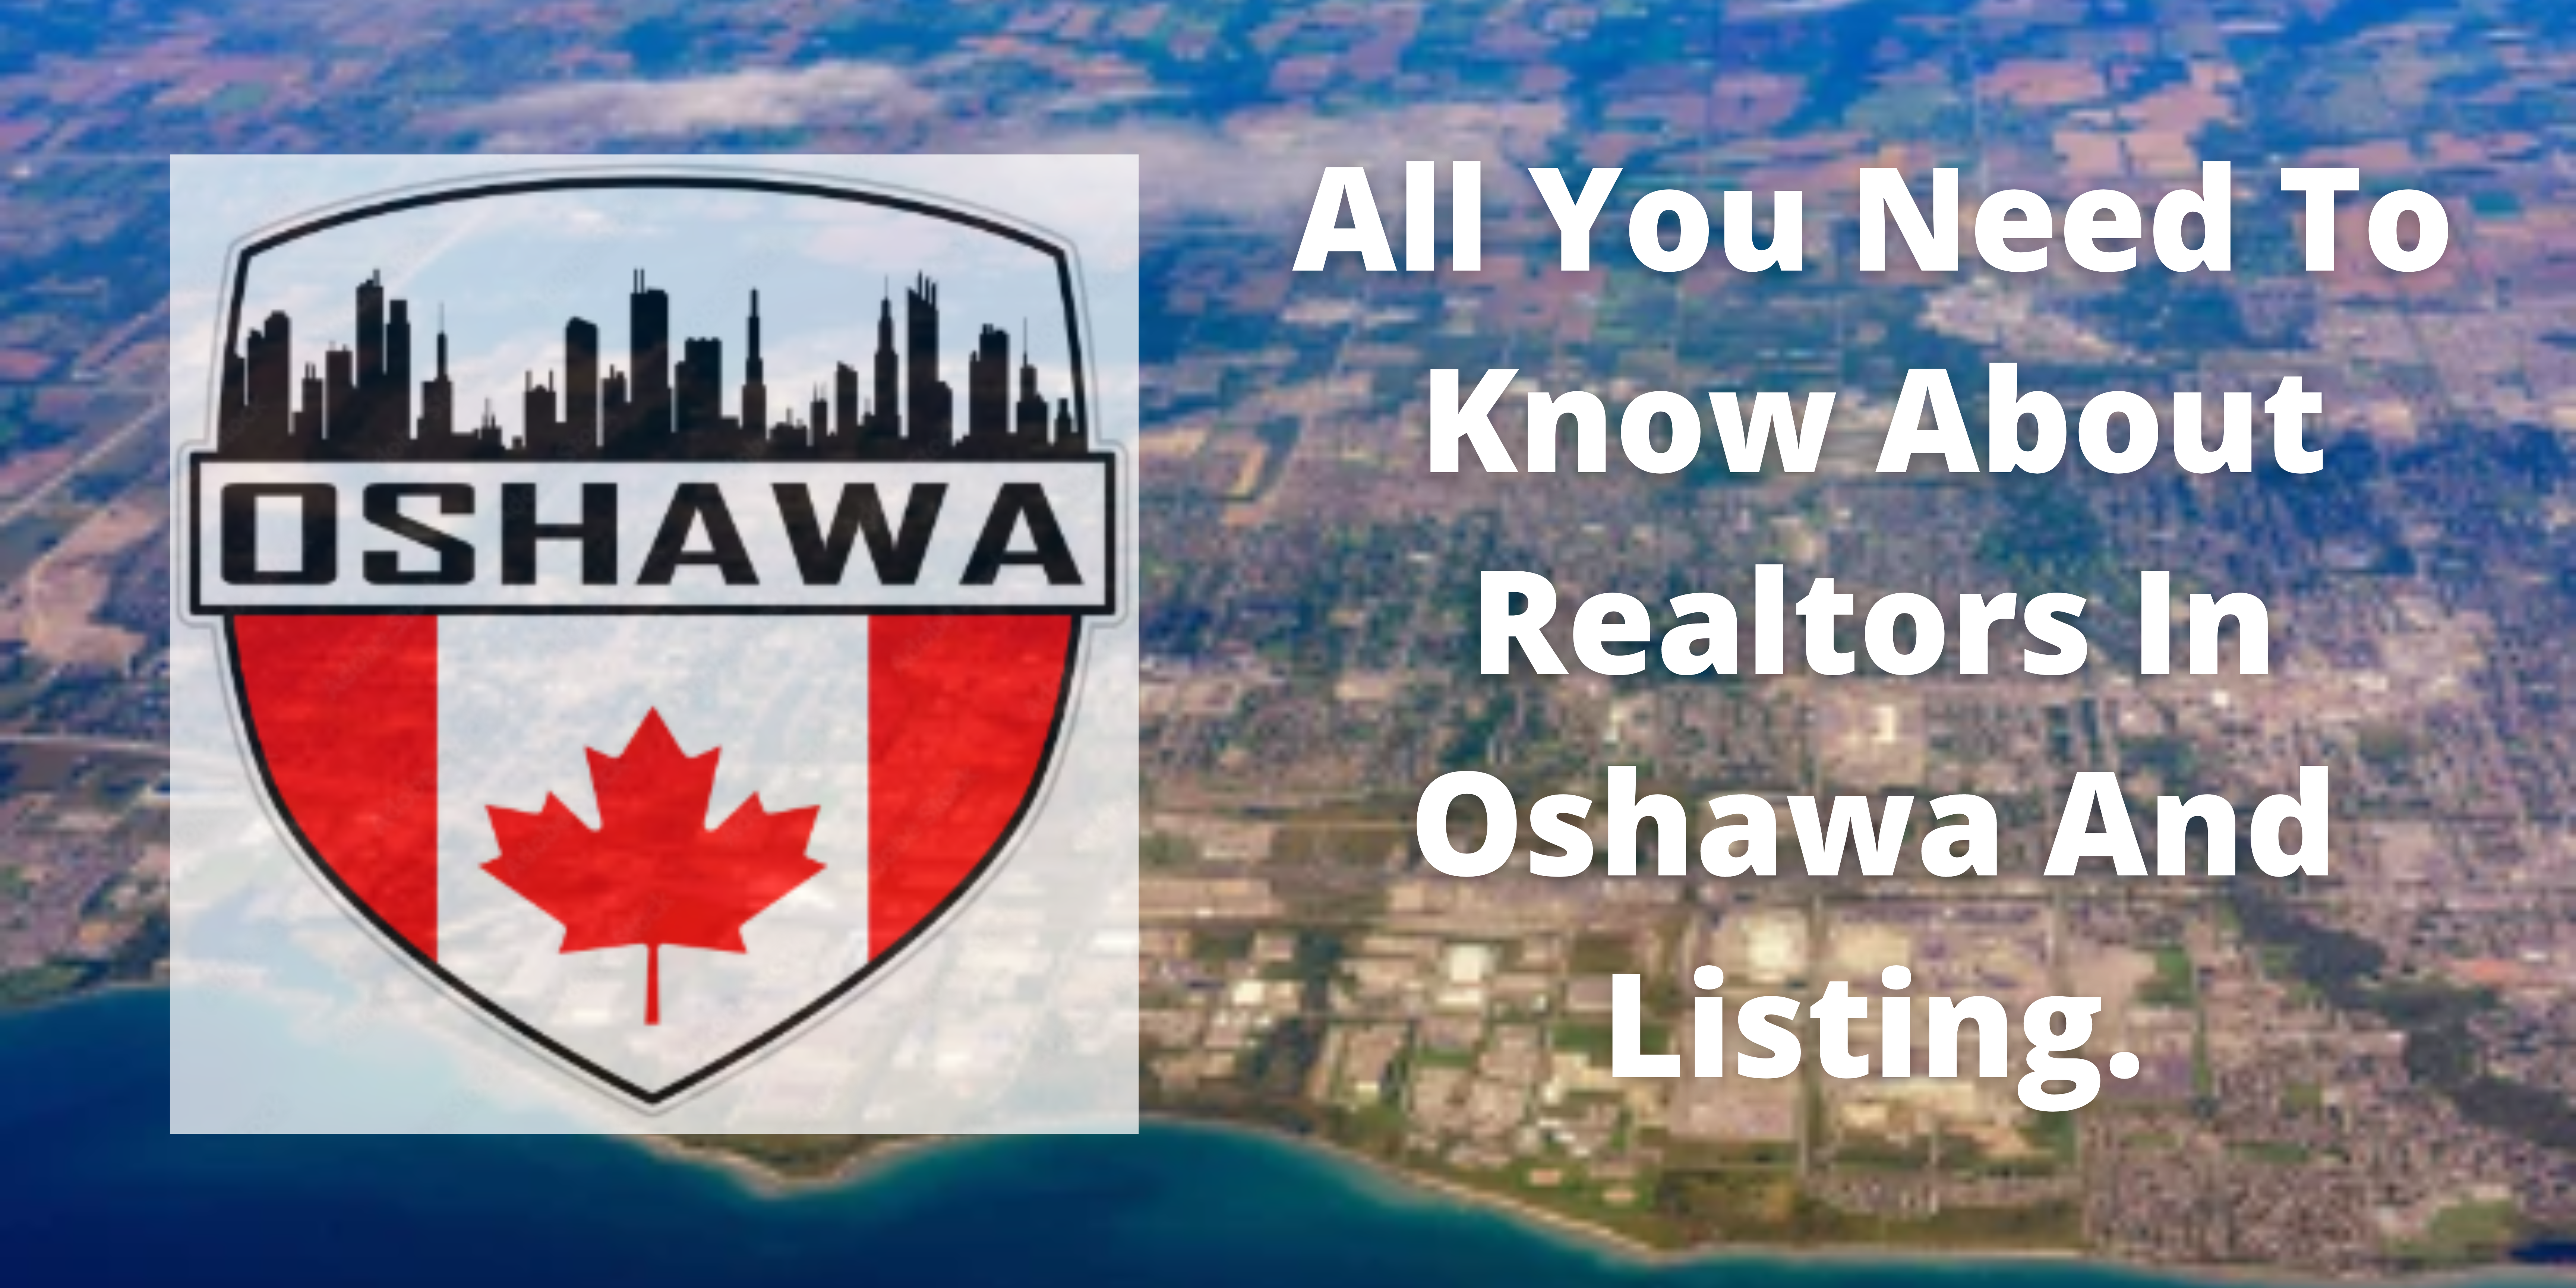 All You Need To Know About Realtors In Oshawa And Listing.